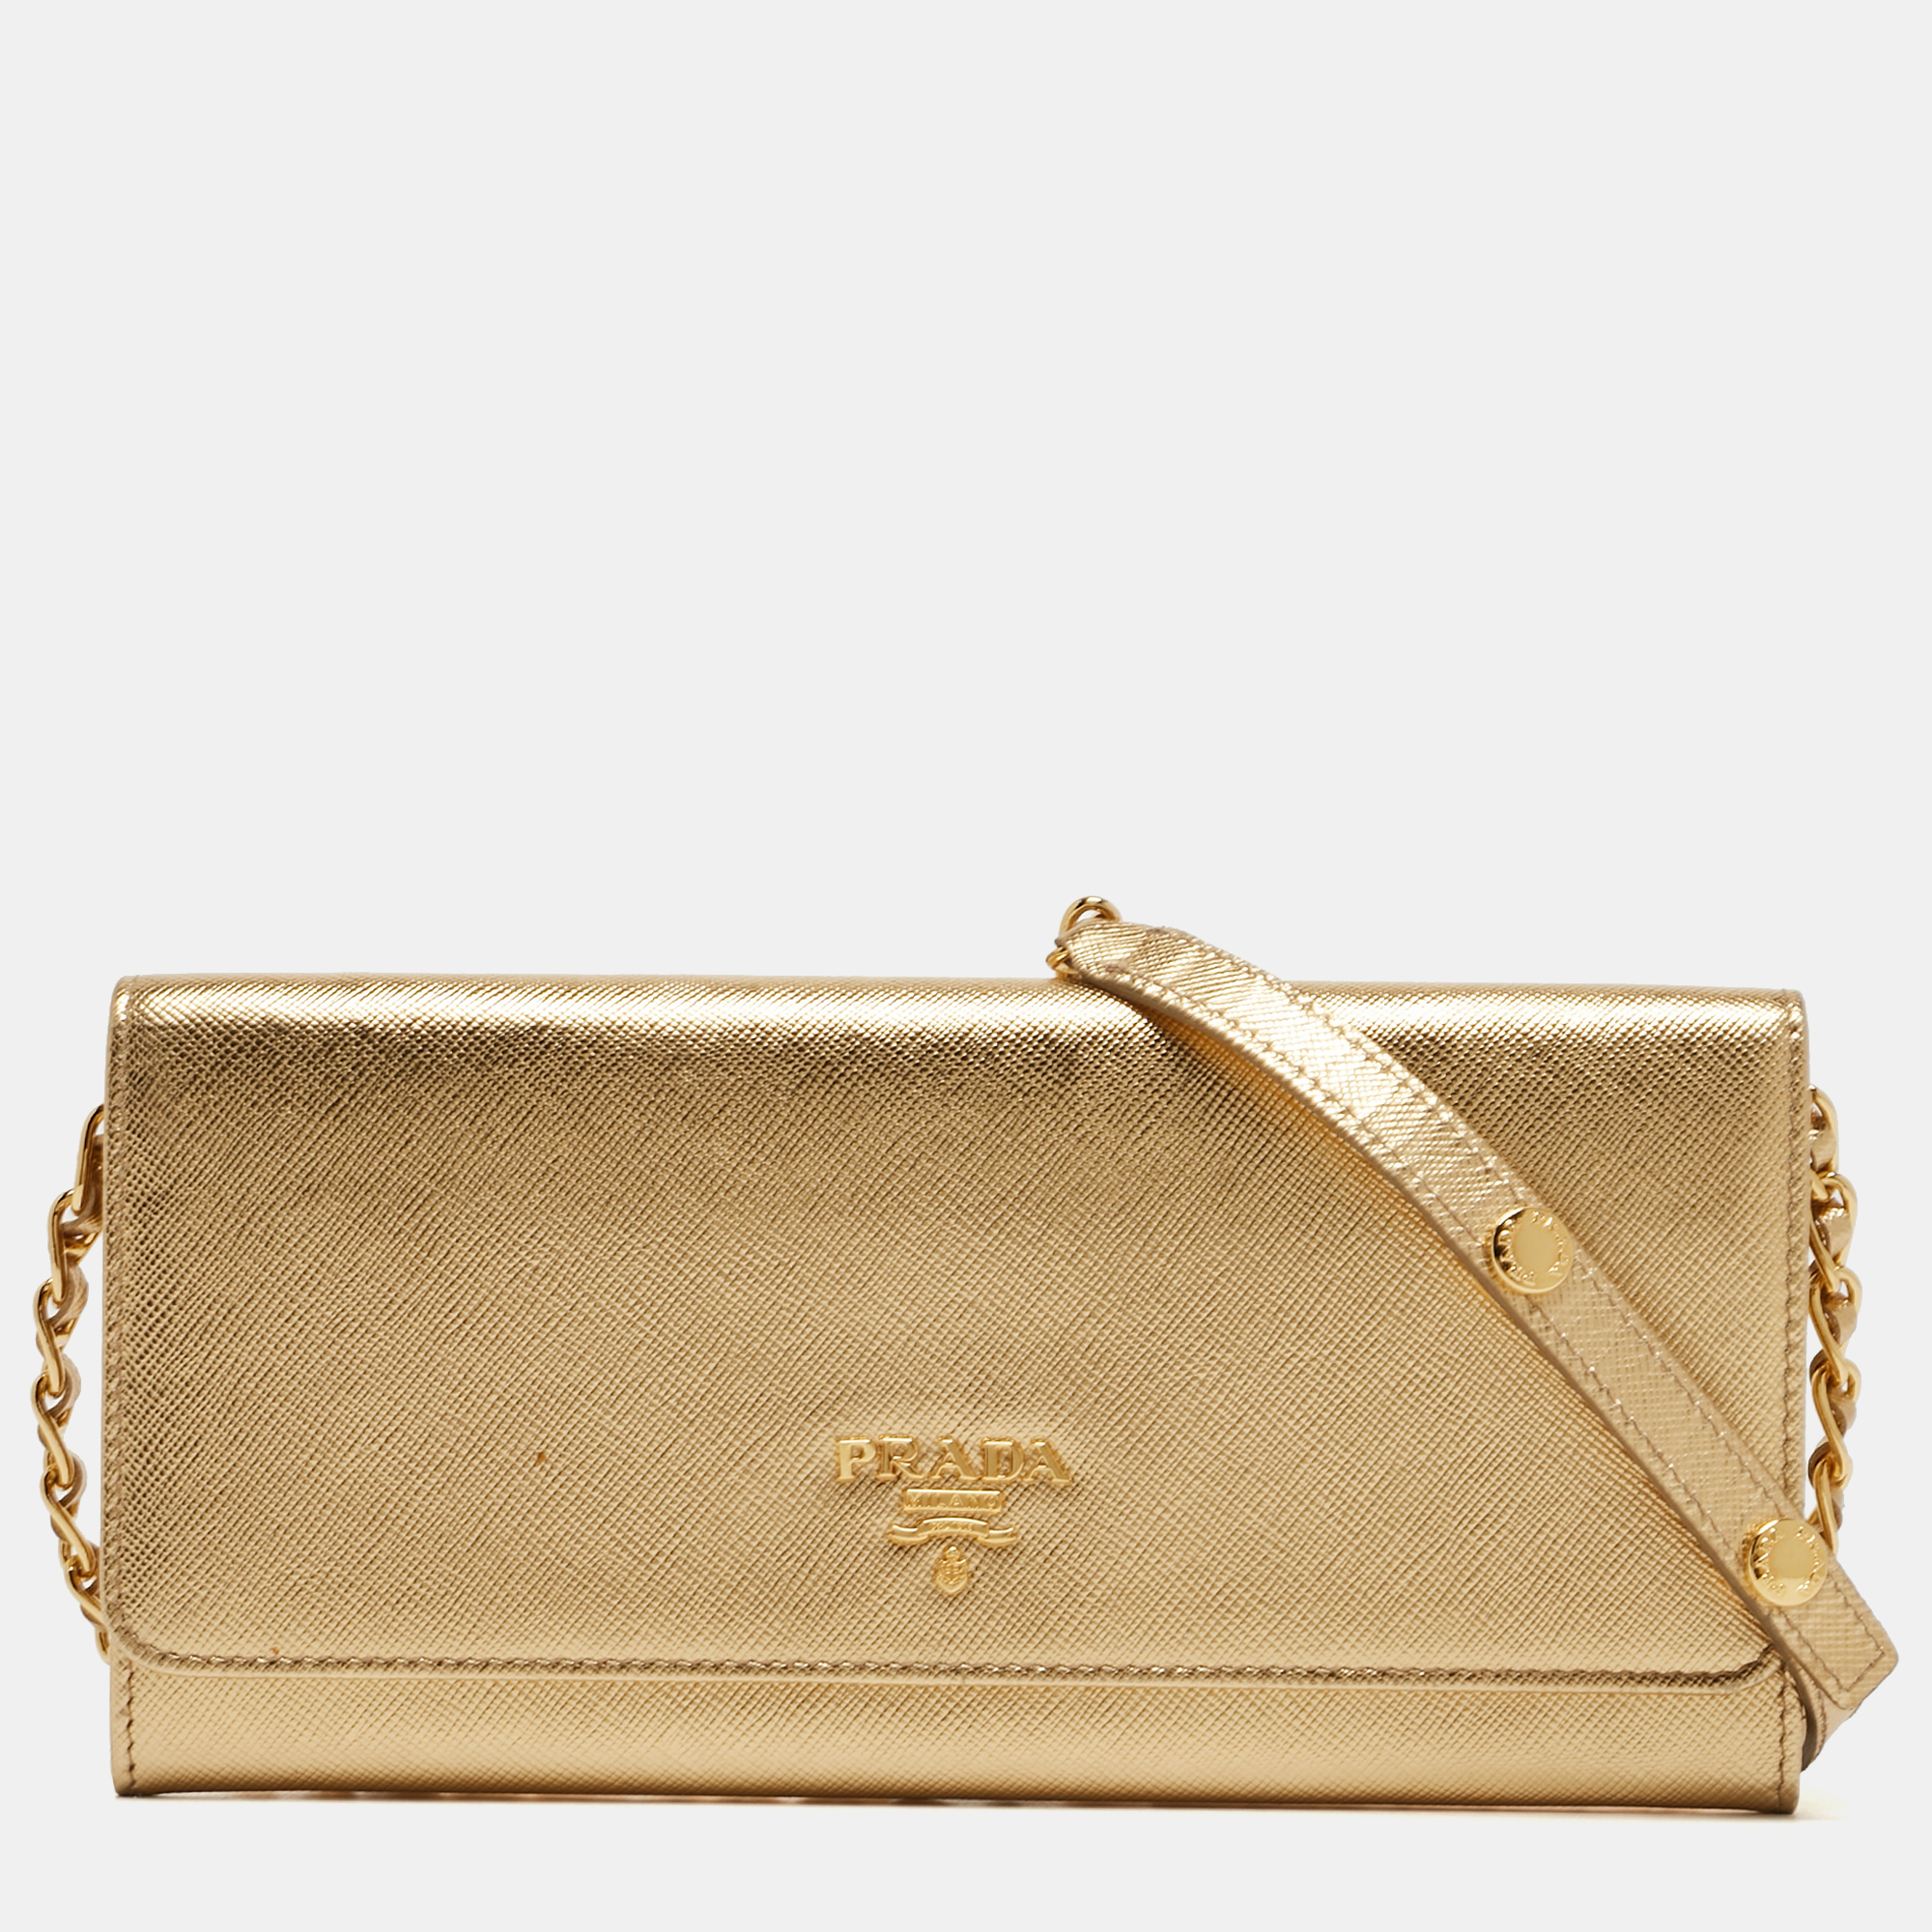 Prada Gold Saffiano Metal Leather Wallet On Chain